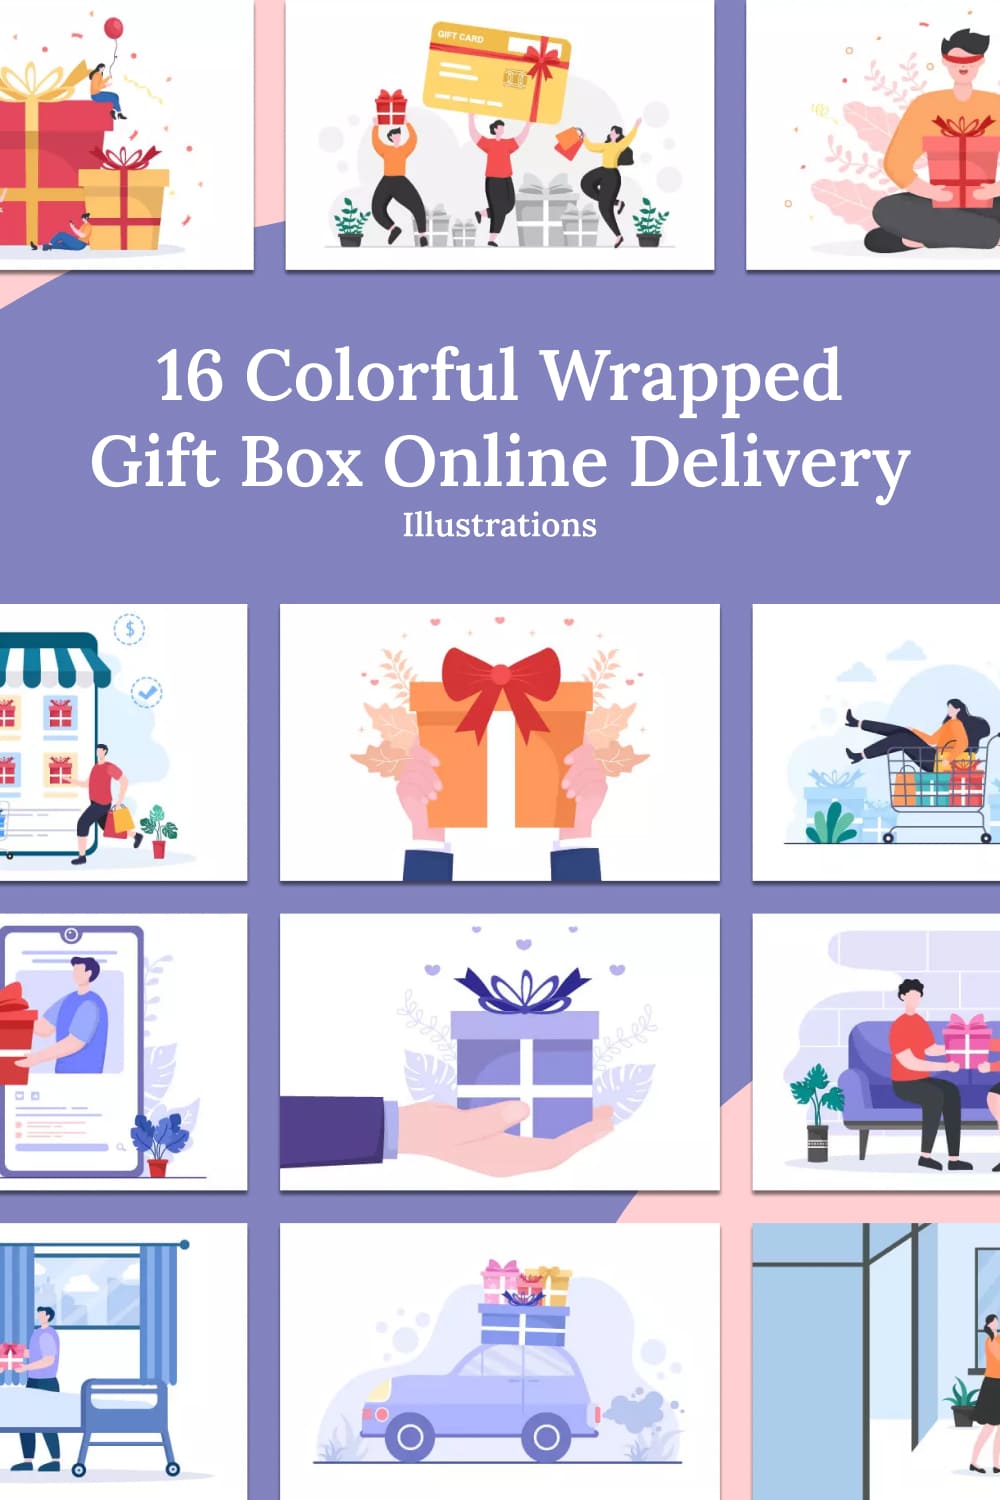 16 colorful wrapped gift box online delivery illustrations 03